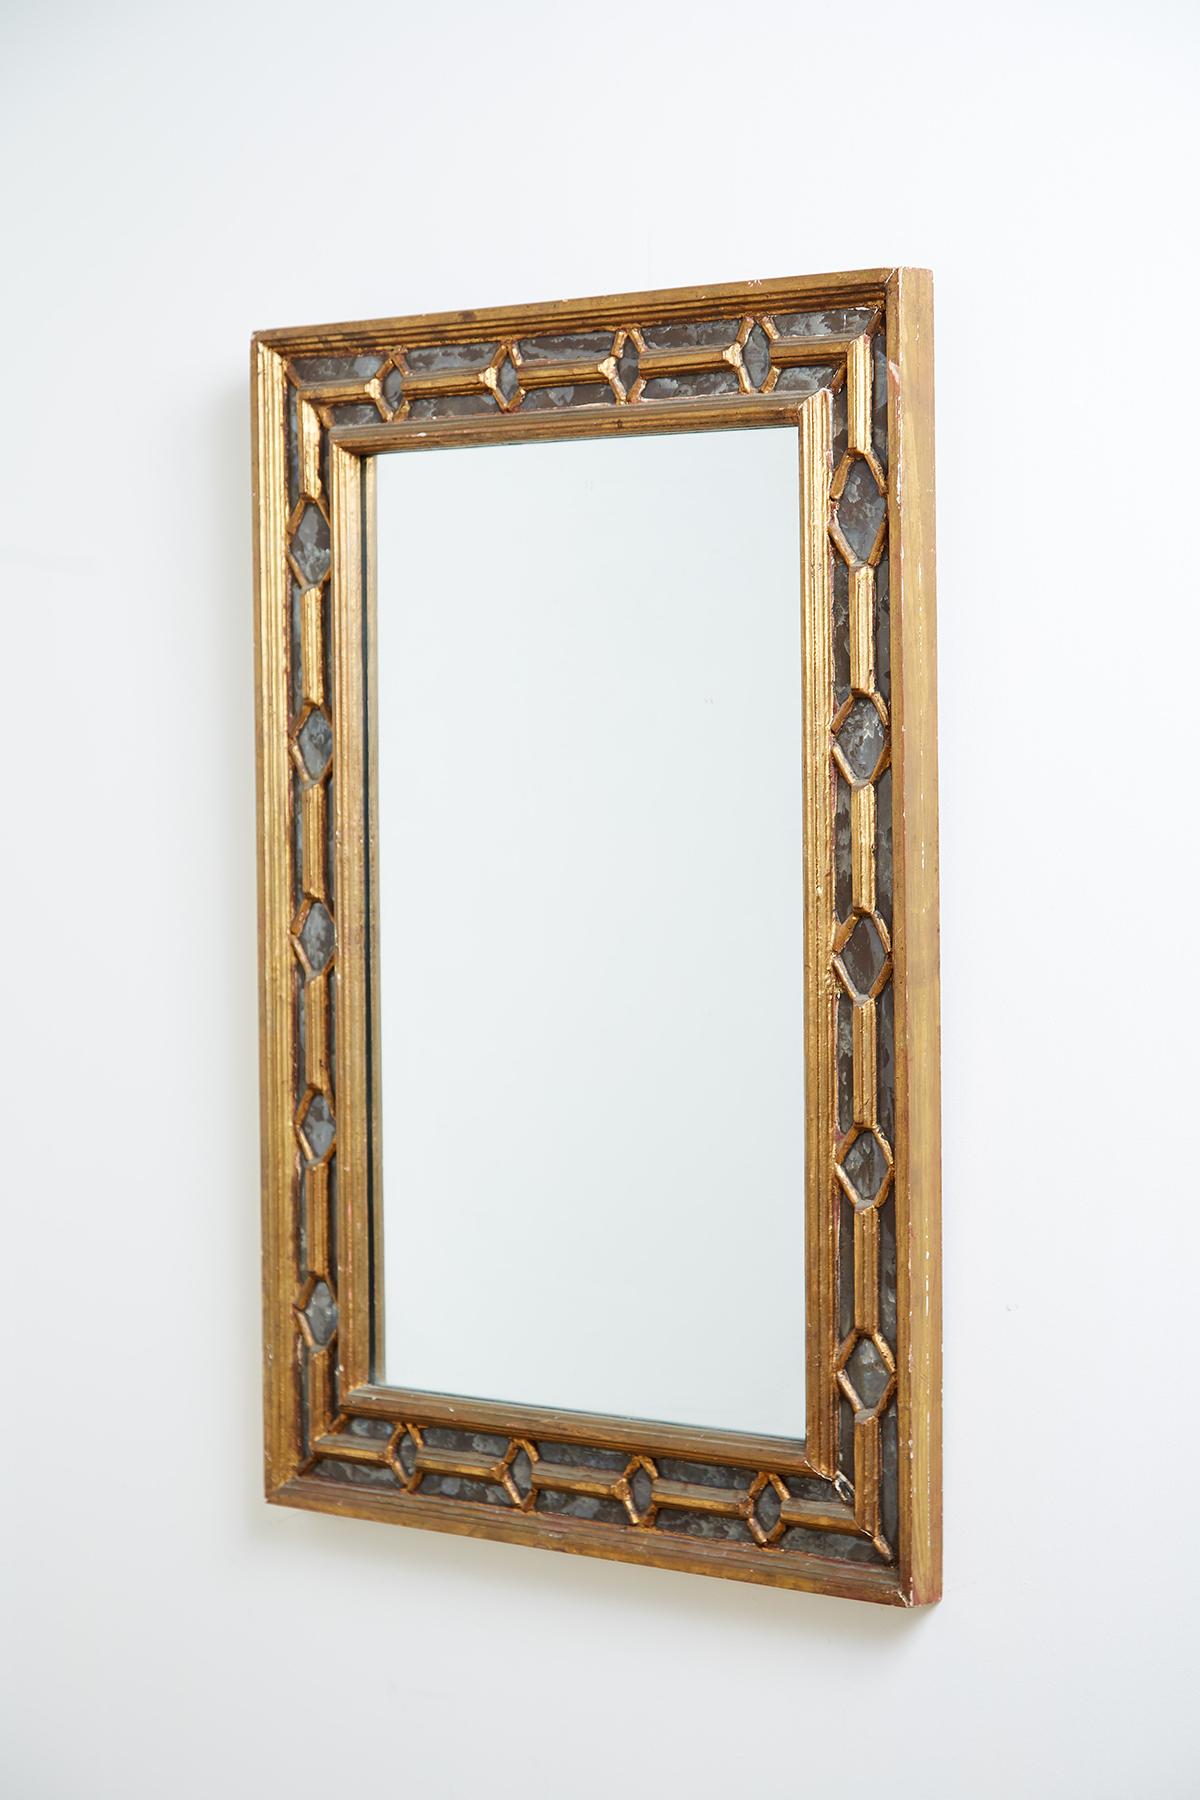 Distinctive 19th century Italian carved giltwood mirror featuring a double carved frame. The frames of the mirror are reeded and showcase a diamond pattern design over antique mirror glass that has a beautifully mottled finish. Centre plate has been